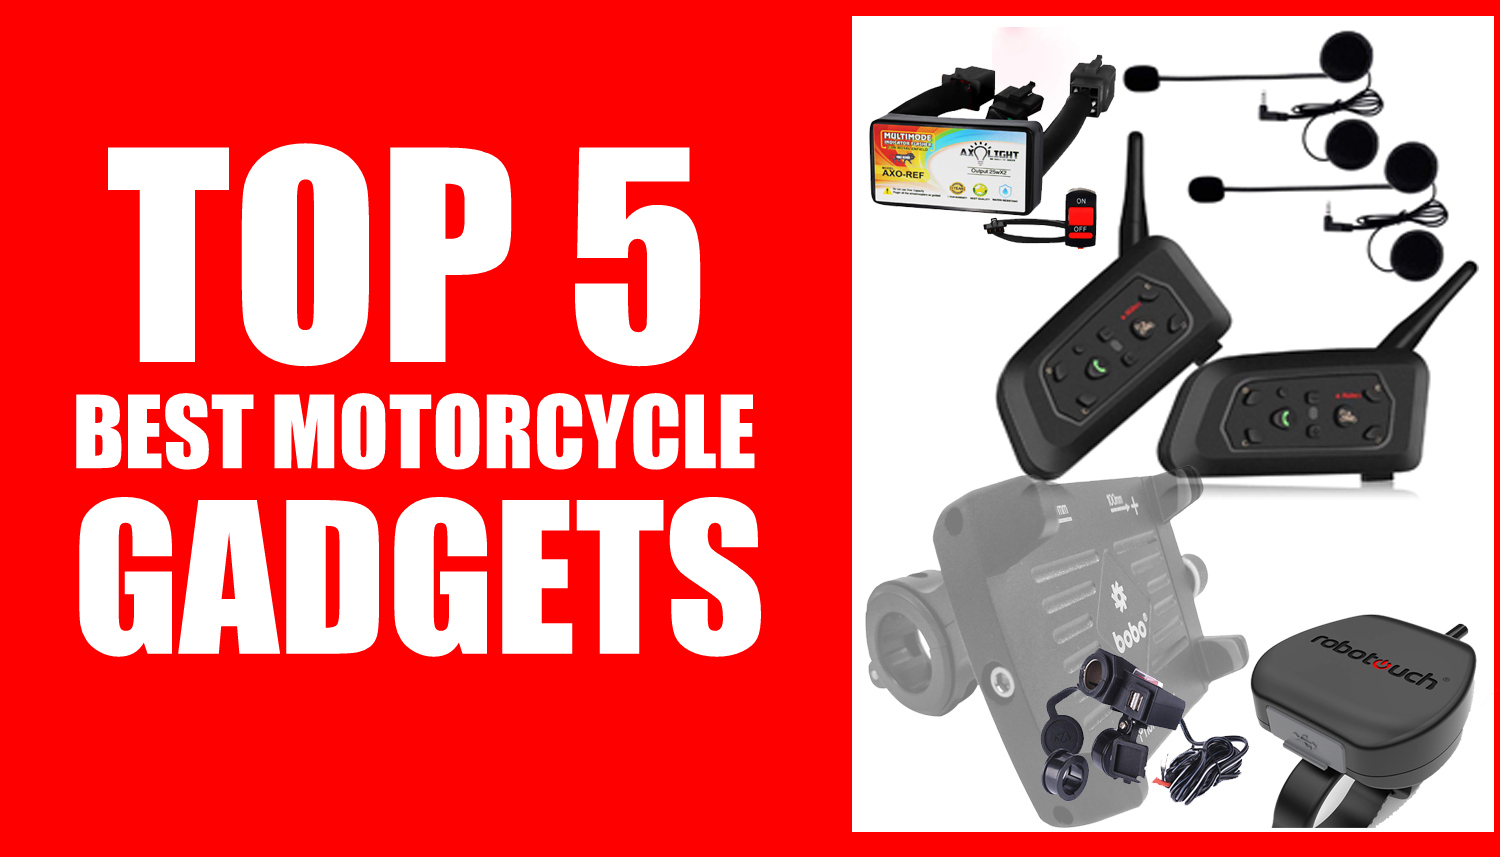 Top 5 Best Motorcycle Gadgets And Accessories In 2021